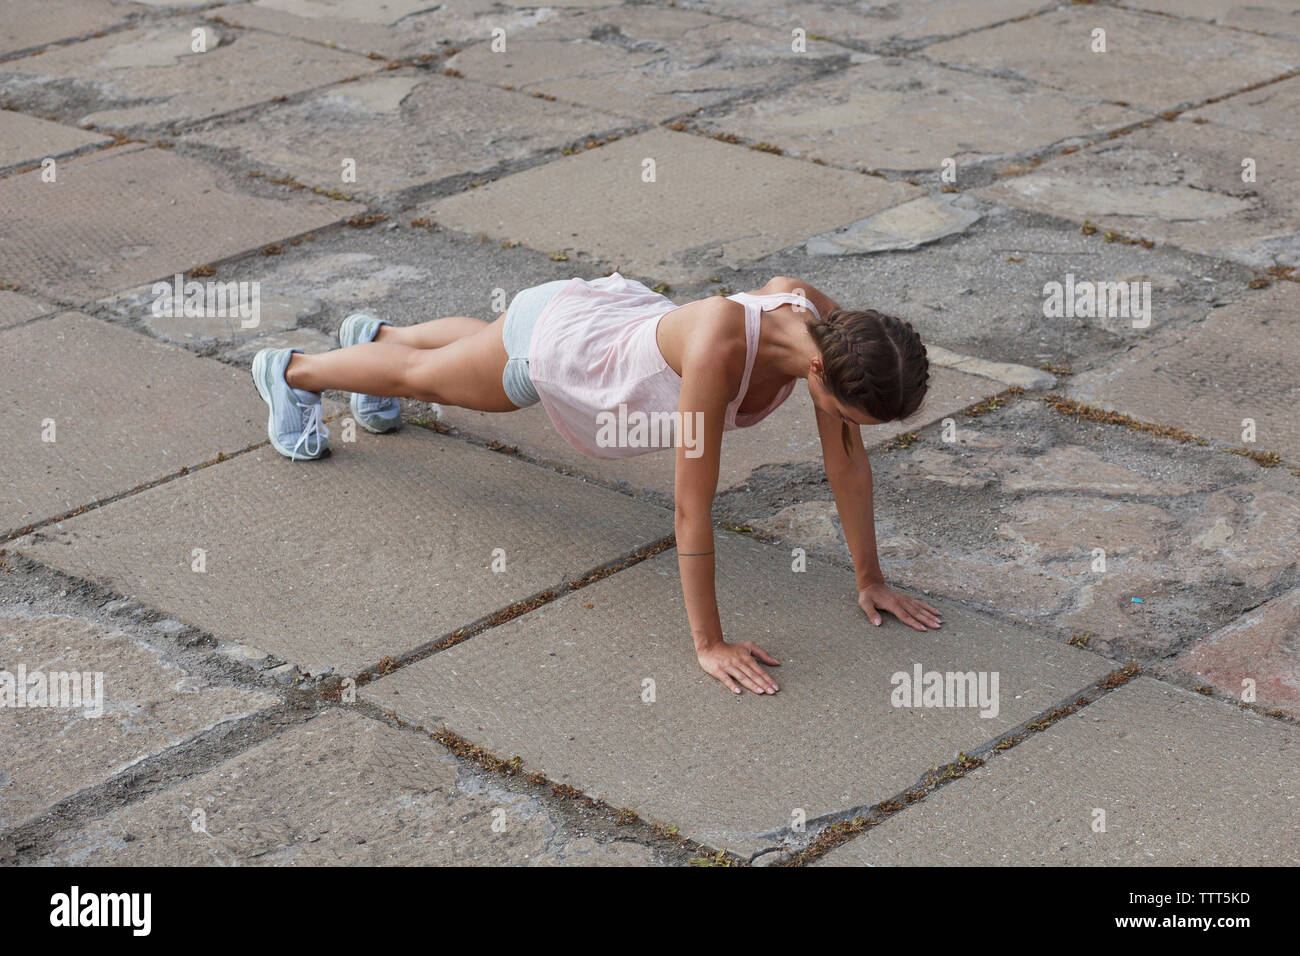 High angle view of woman doing push-ups on street in city Stock Photo